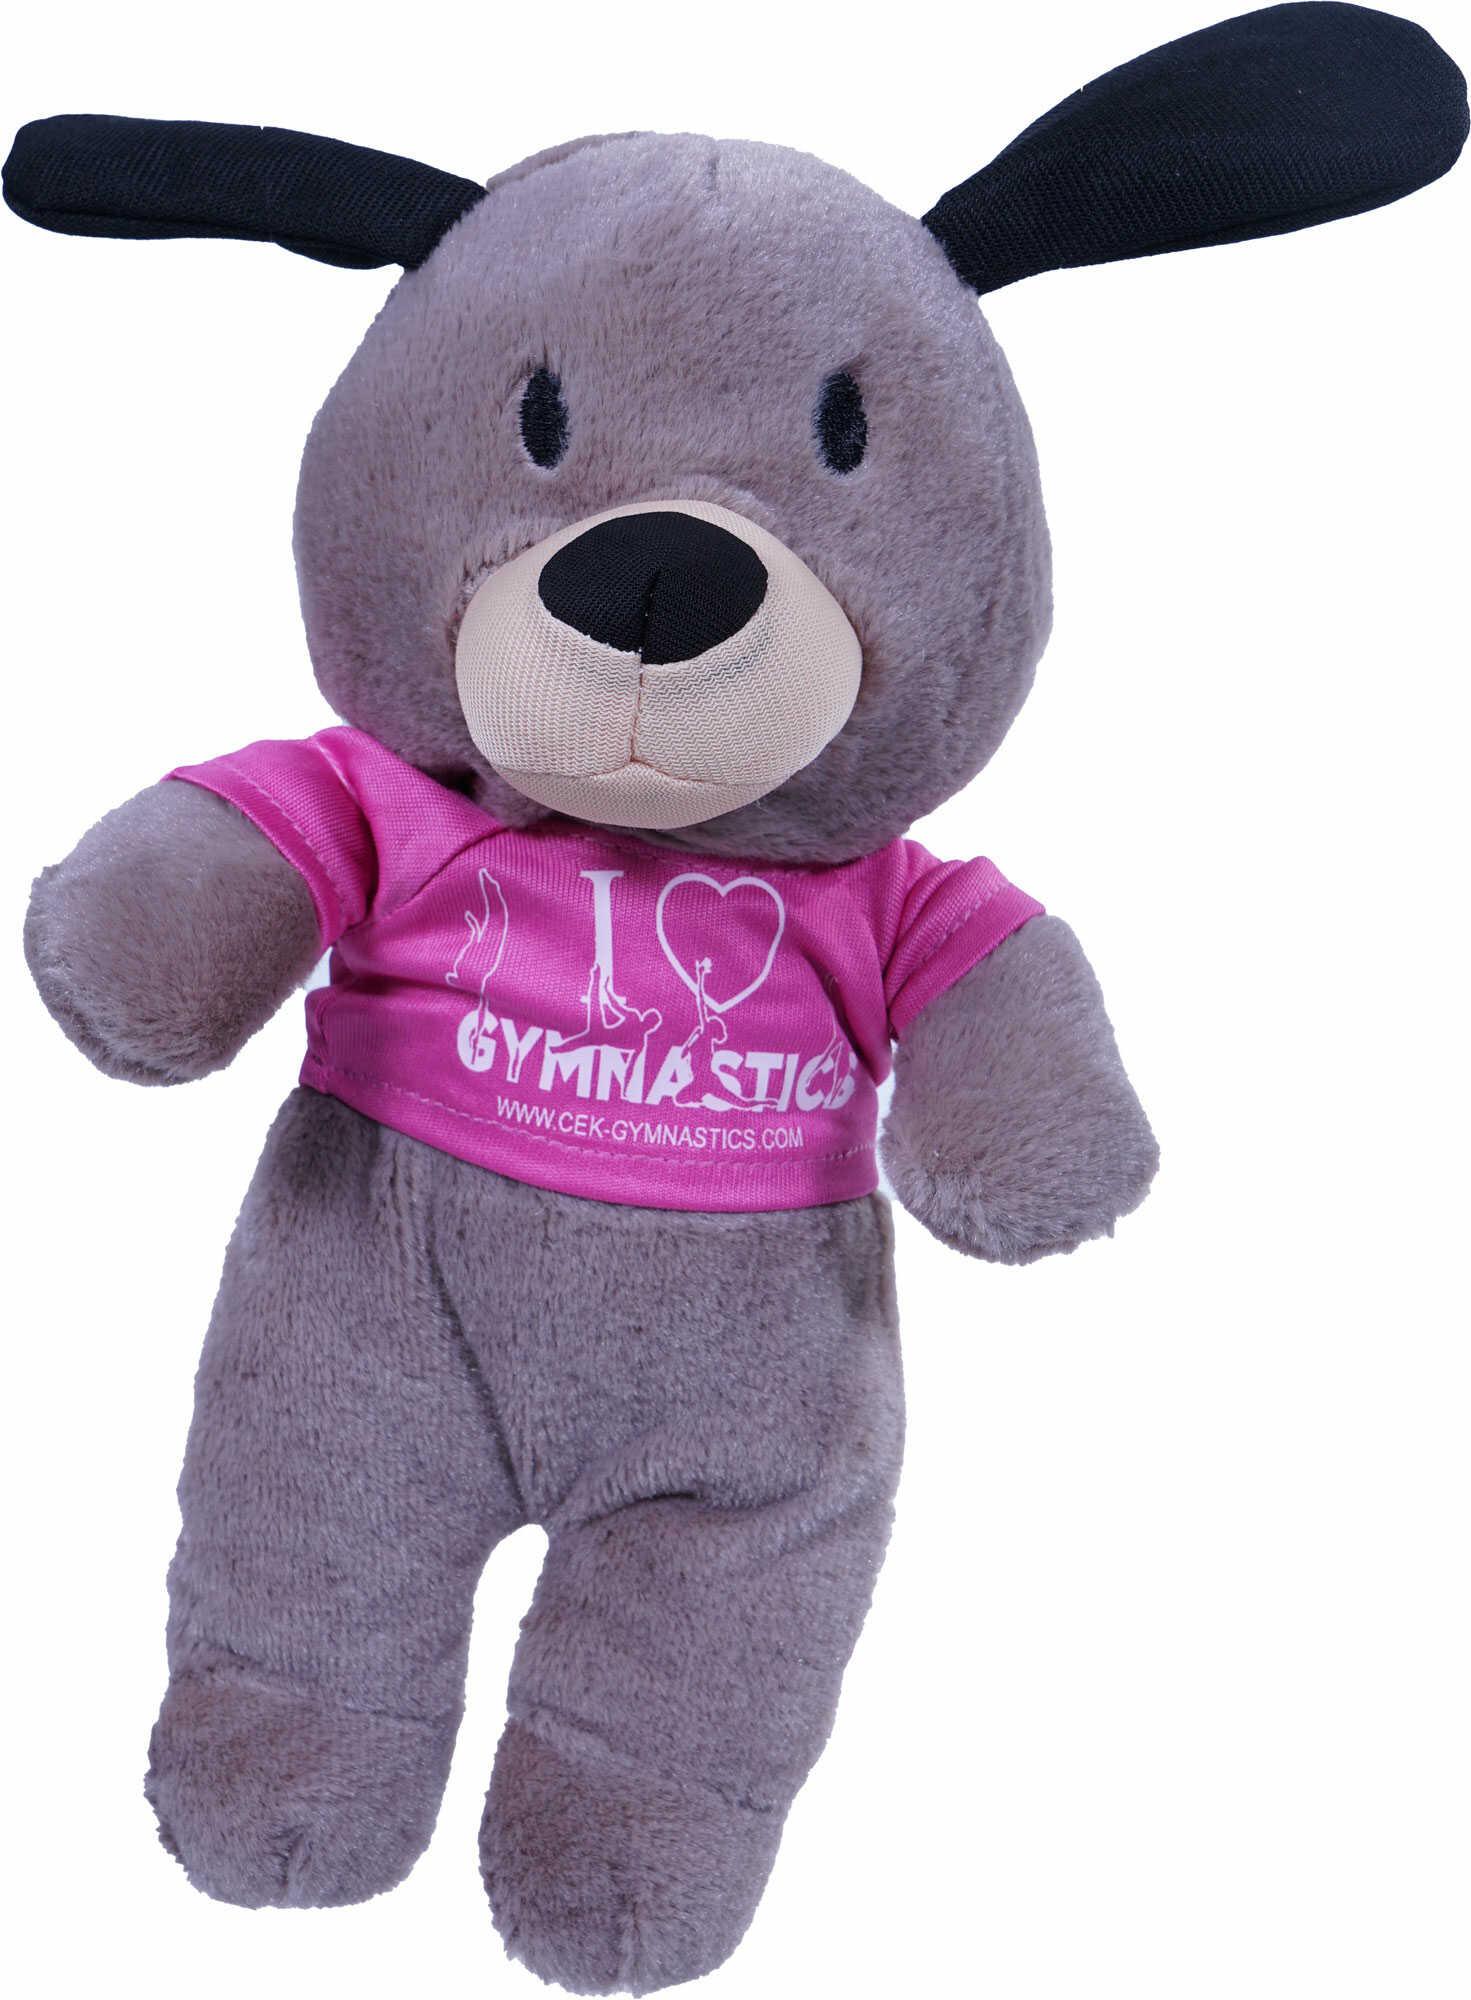 Dog cuddly toy with promo t-shirt